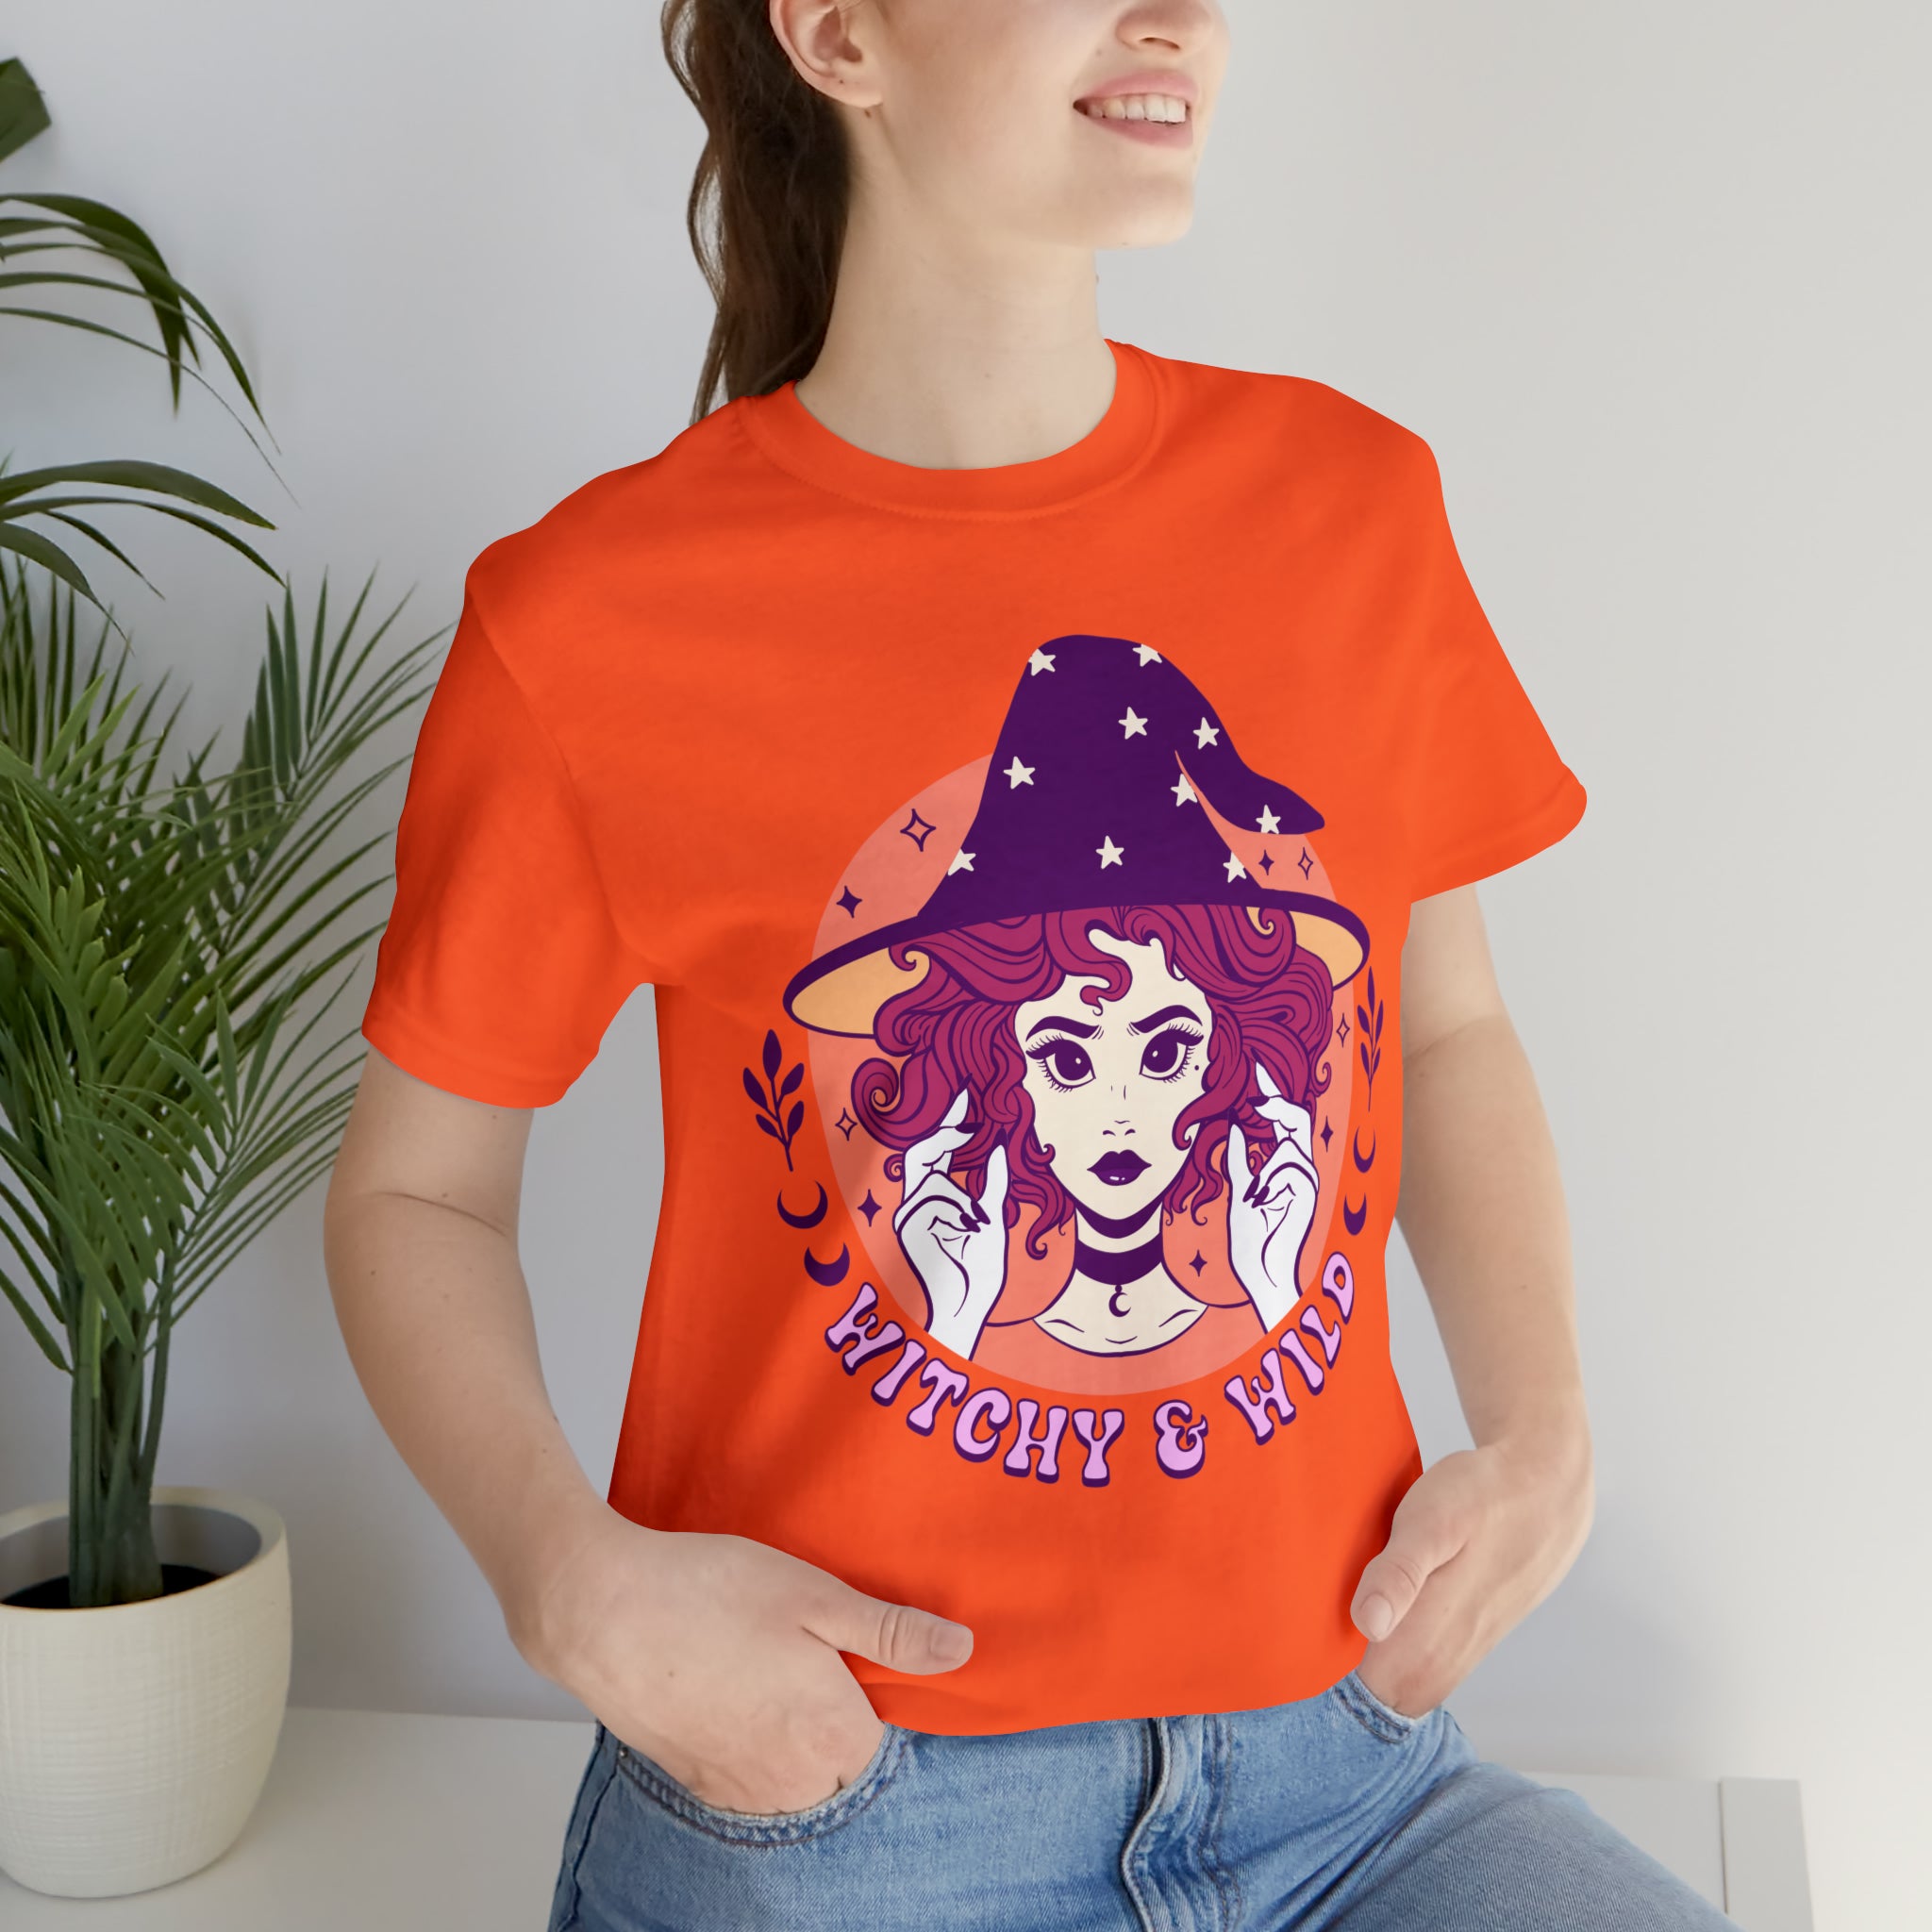 Witchy And Wild T-Shirt Black, Orange, White, Halloween Shirt, Witchy Vibes